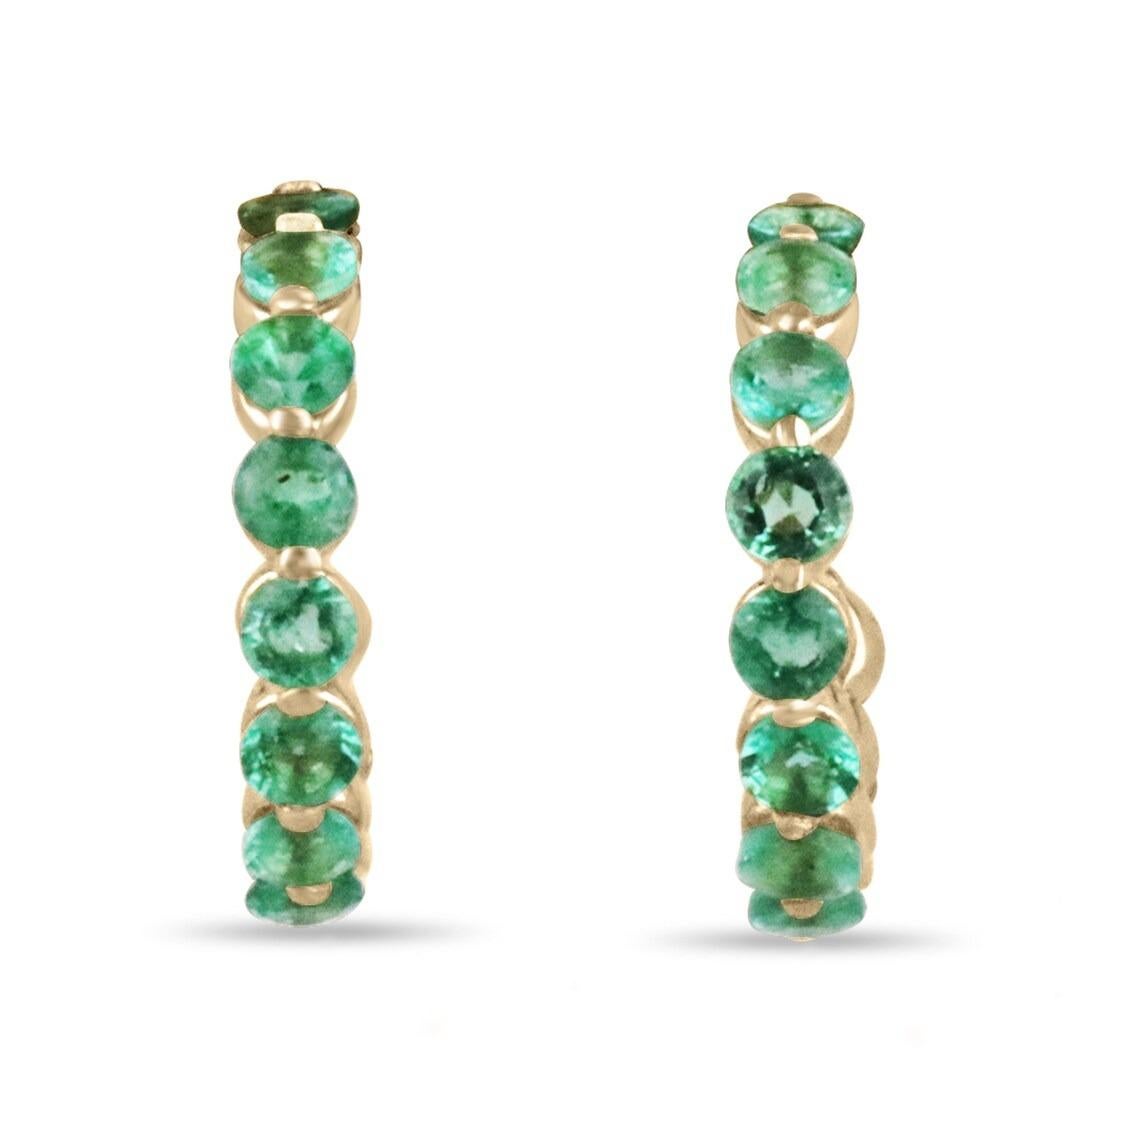 Get excited about these beautiful earrings with 1.50tcw of round-cut genuine emeralds skillfully hand set in solid 14K gold. They're perfect for everyday wear and are loved by both JR Colombian emeralds and customers for their elegant design and